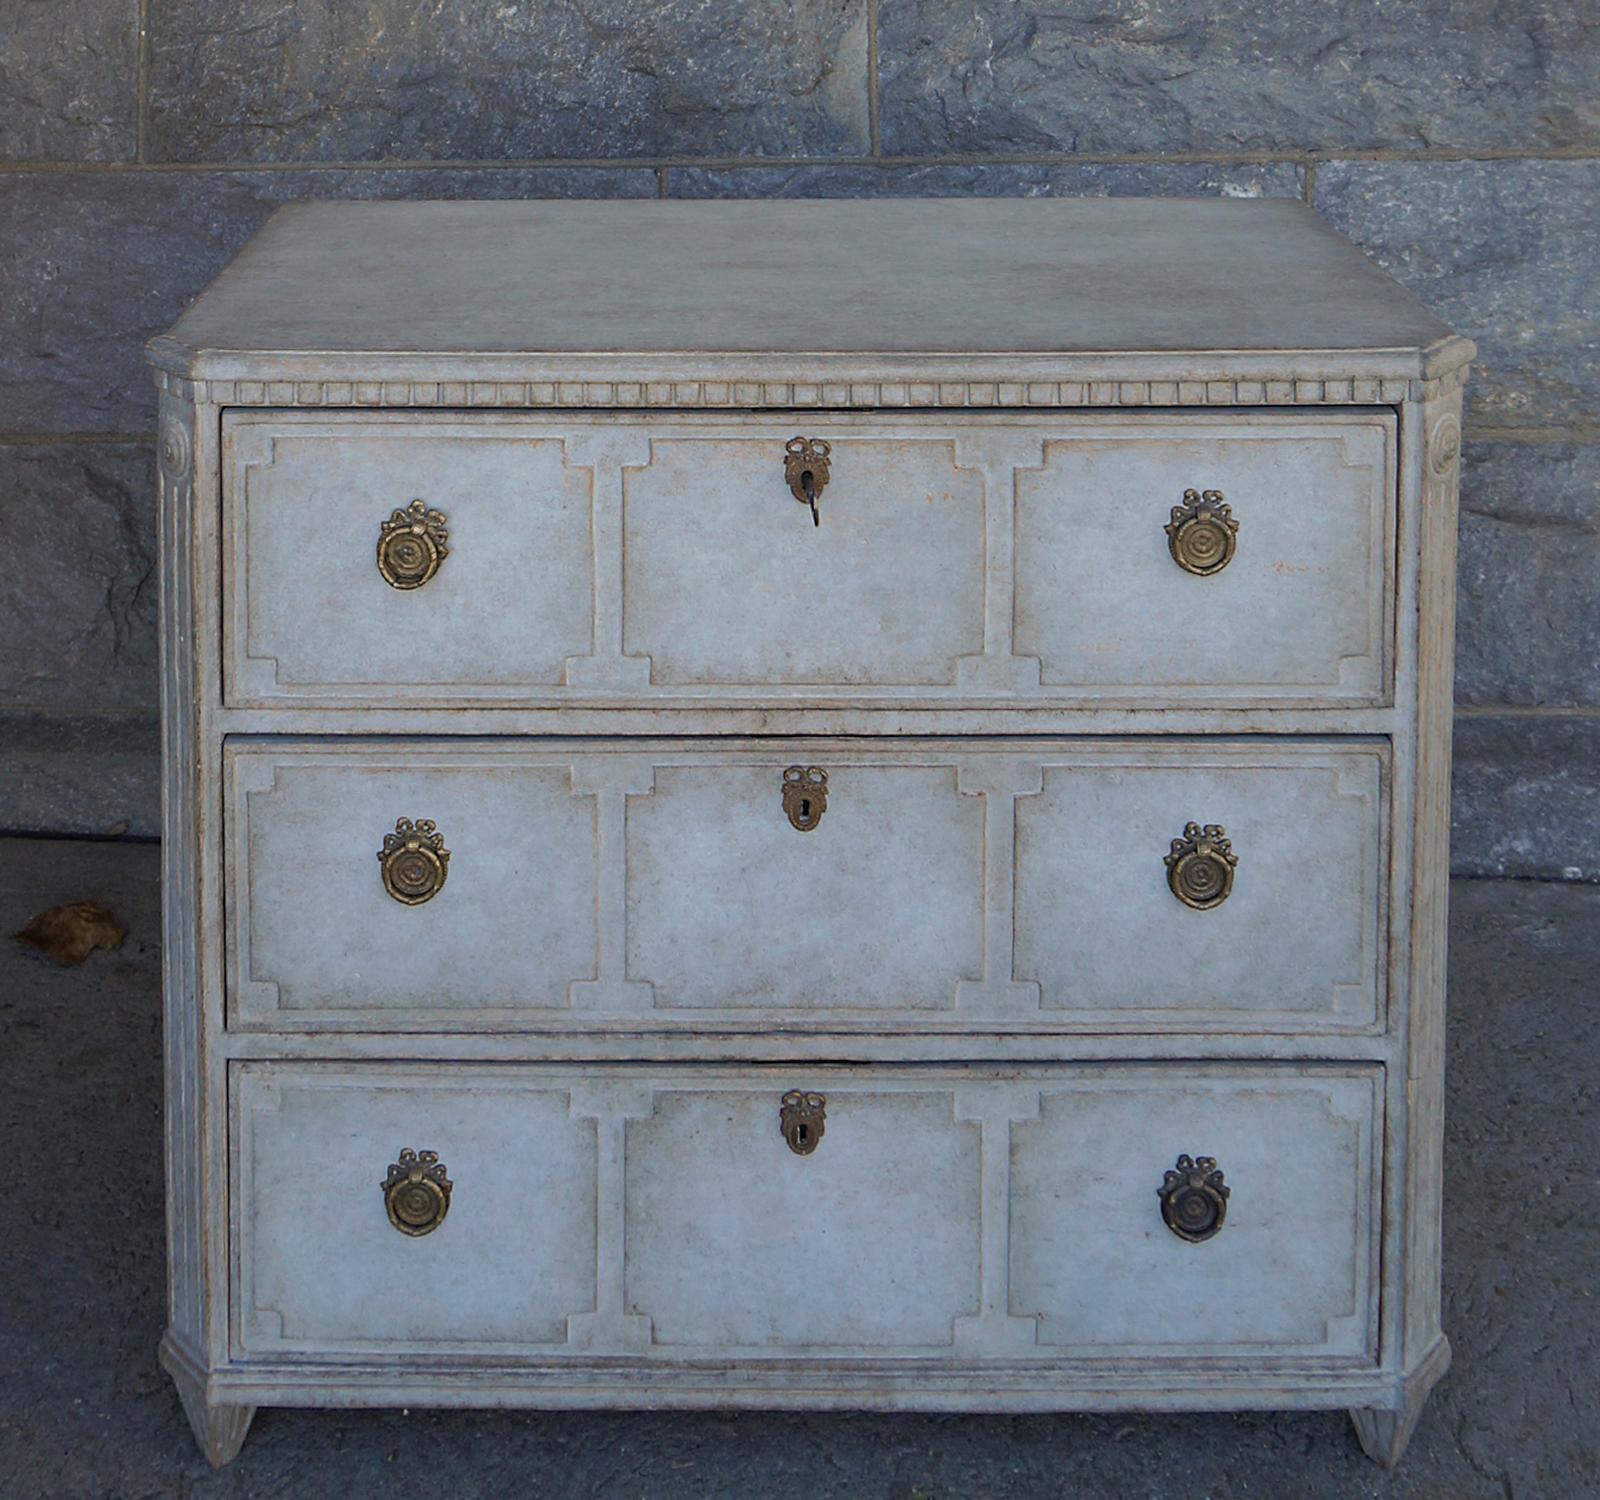 Swedish chest of drawers, circa 1870, with dentil molding at the top and canted corners with rondels and reeding. The drawer fronts each have three raised panels with notched corners, all inside a raised border. The hardware has been replaced.